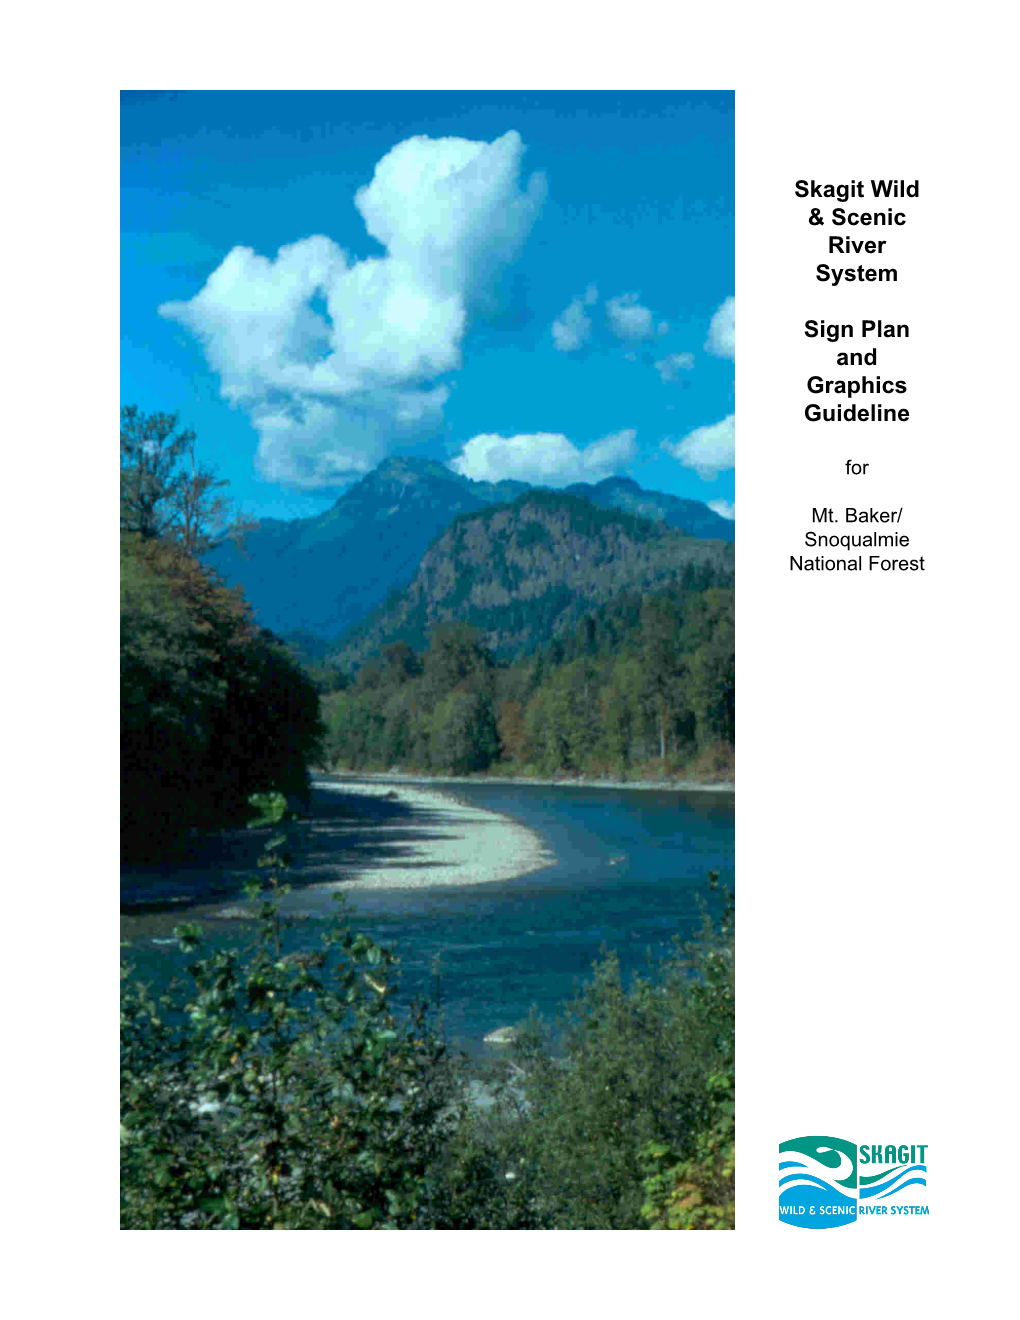 Skagit Wild & Scenic River System Sign Plan and Graphics Guideline